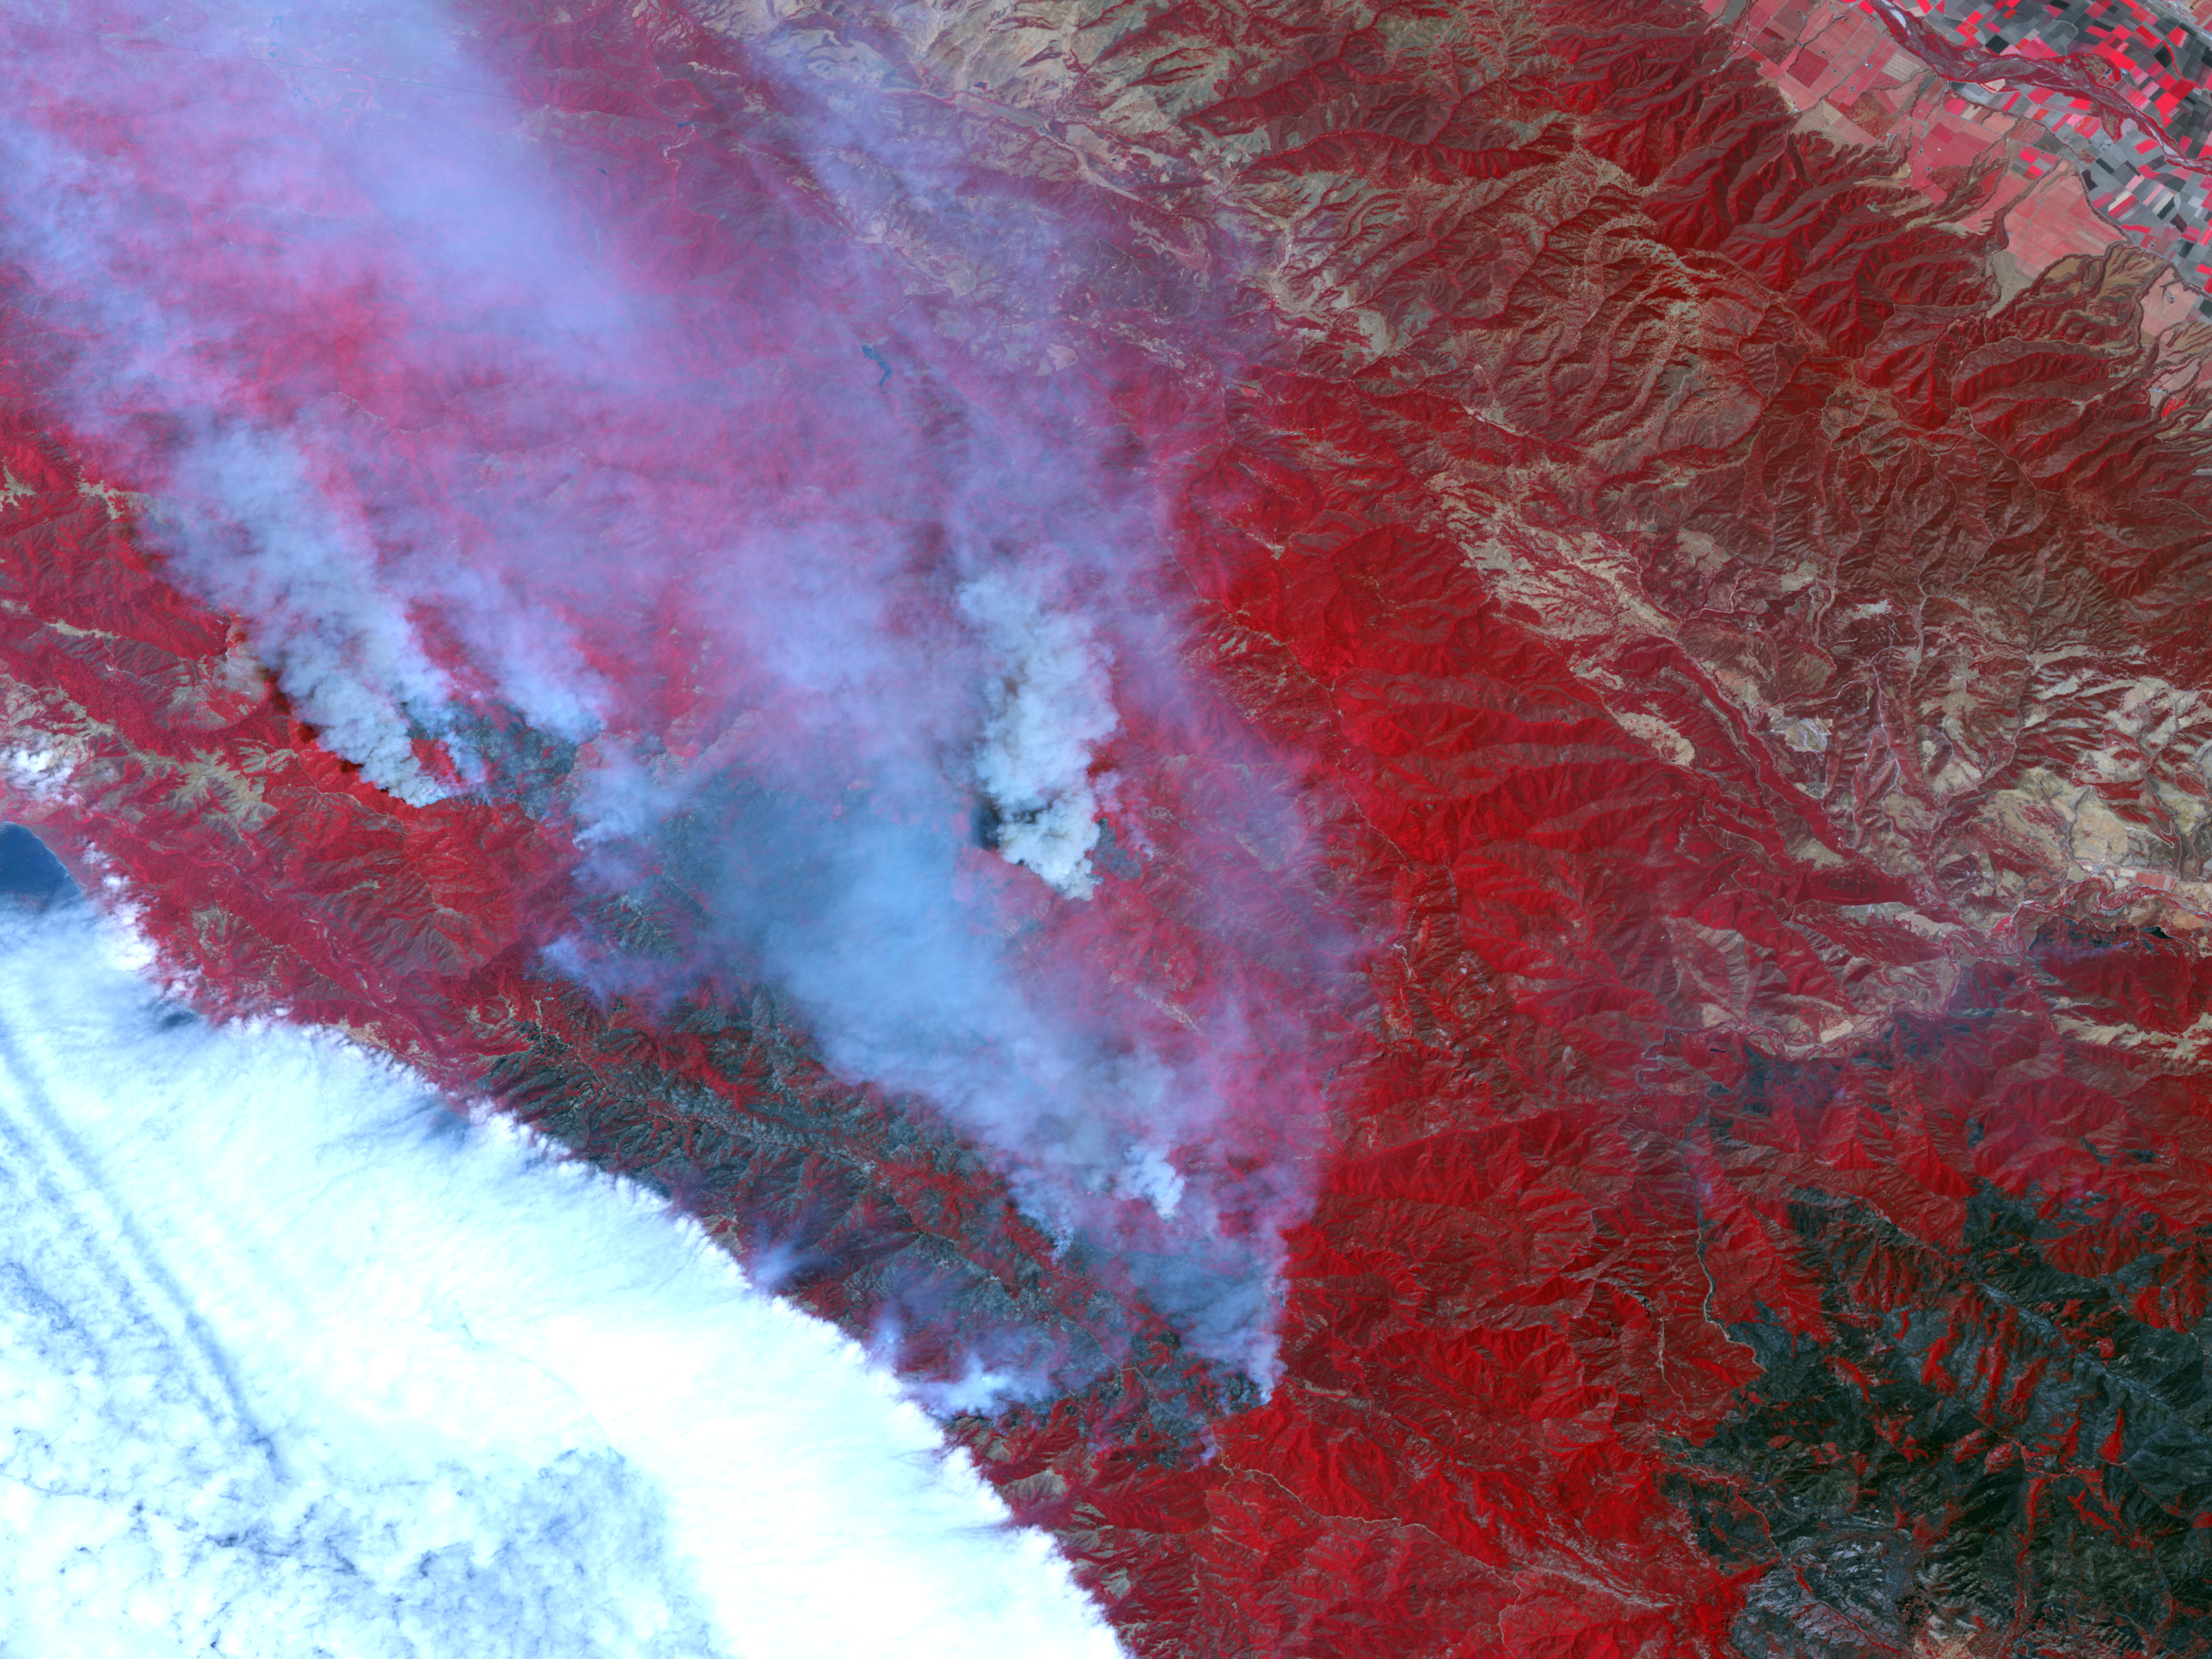 Basin Complex Fire Near Big Sur, California  - related image preview